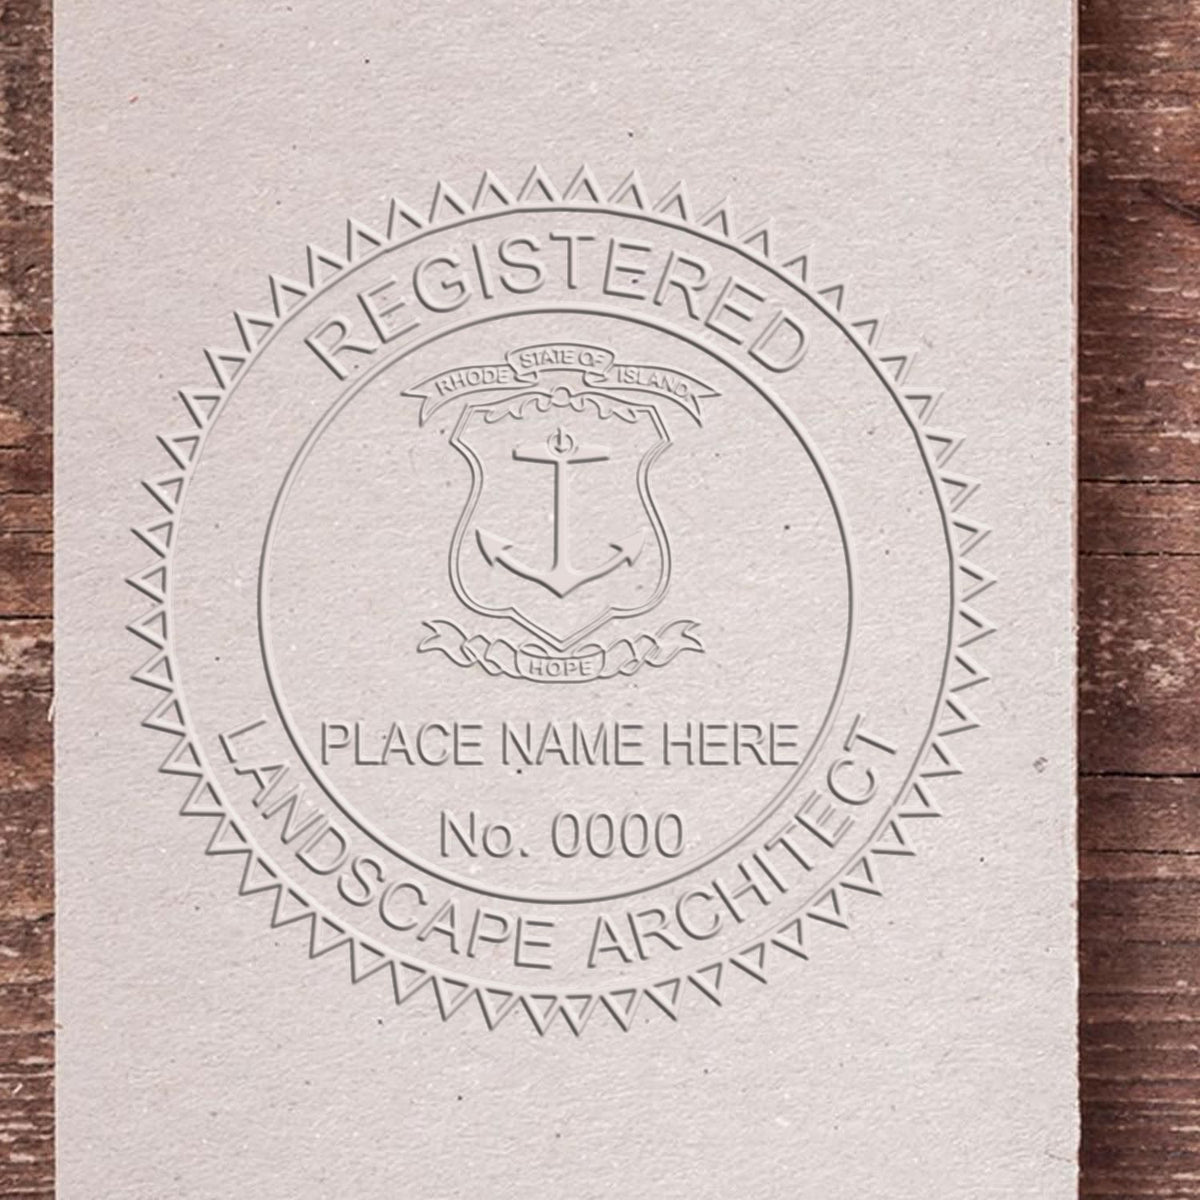 An in use photo of the Hybrid Rhode Island Landscape Architect Seal showing a sample imprint on a cardstock